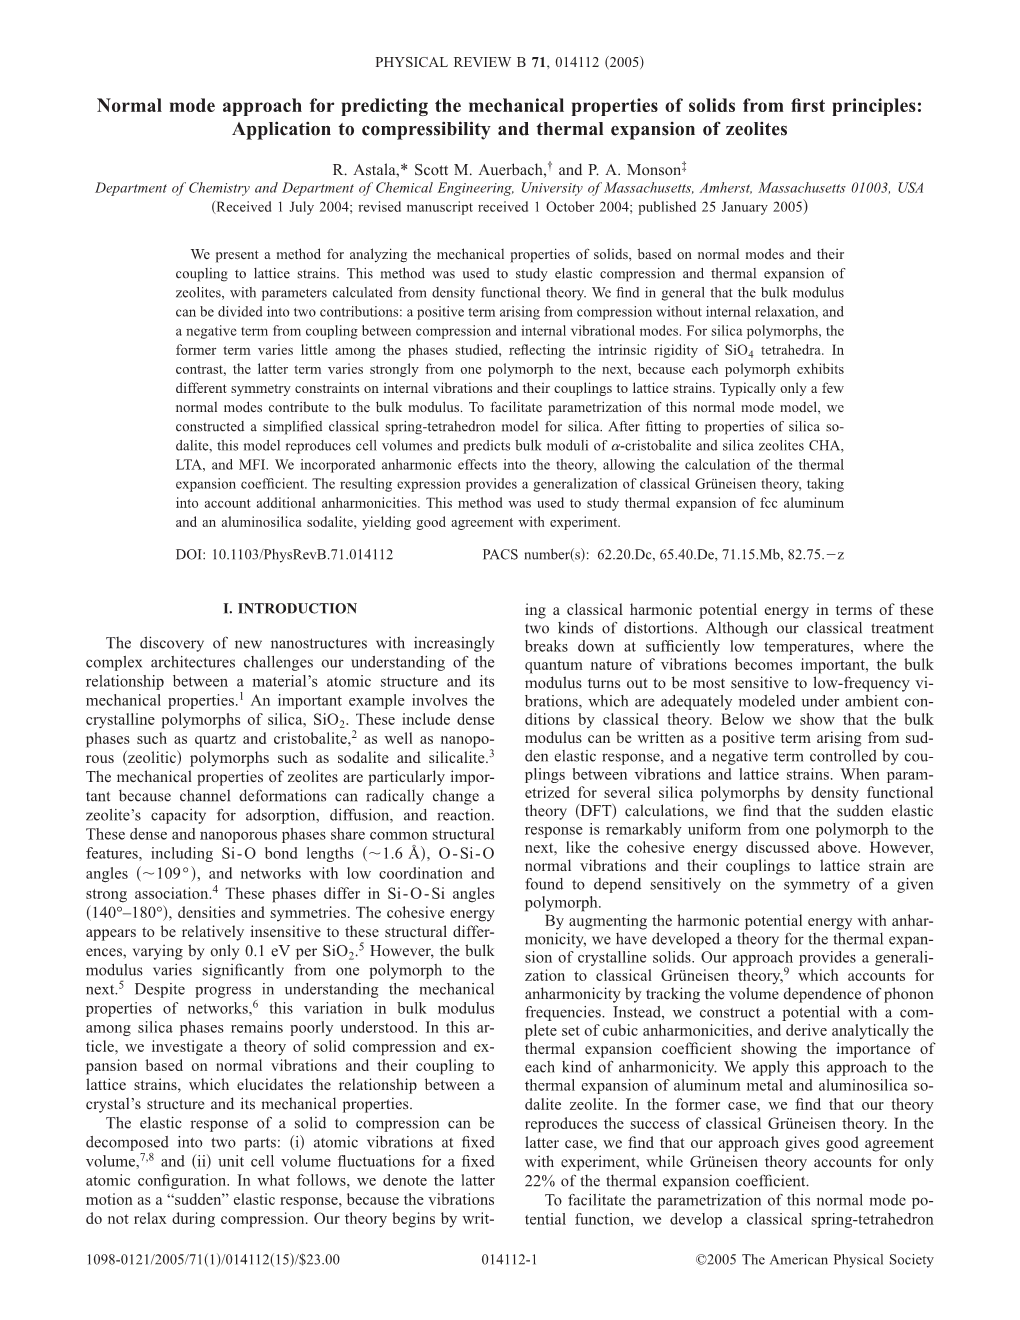 Normal Mode Approach for Predicting the Mechanical Properties of Solids from First Principles: Application to Compressibility An